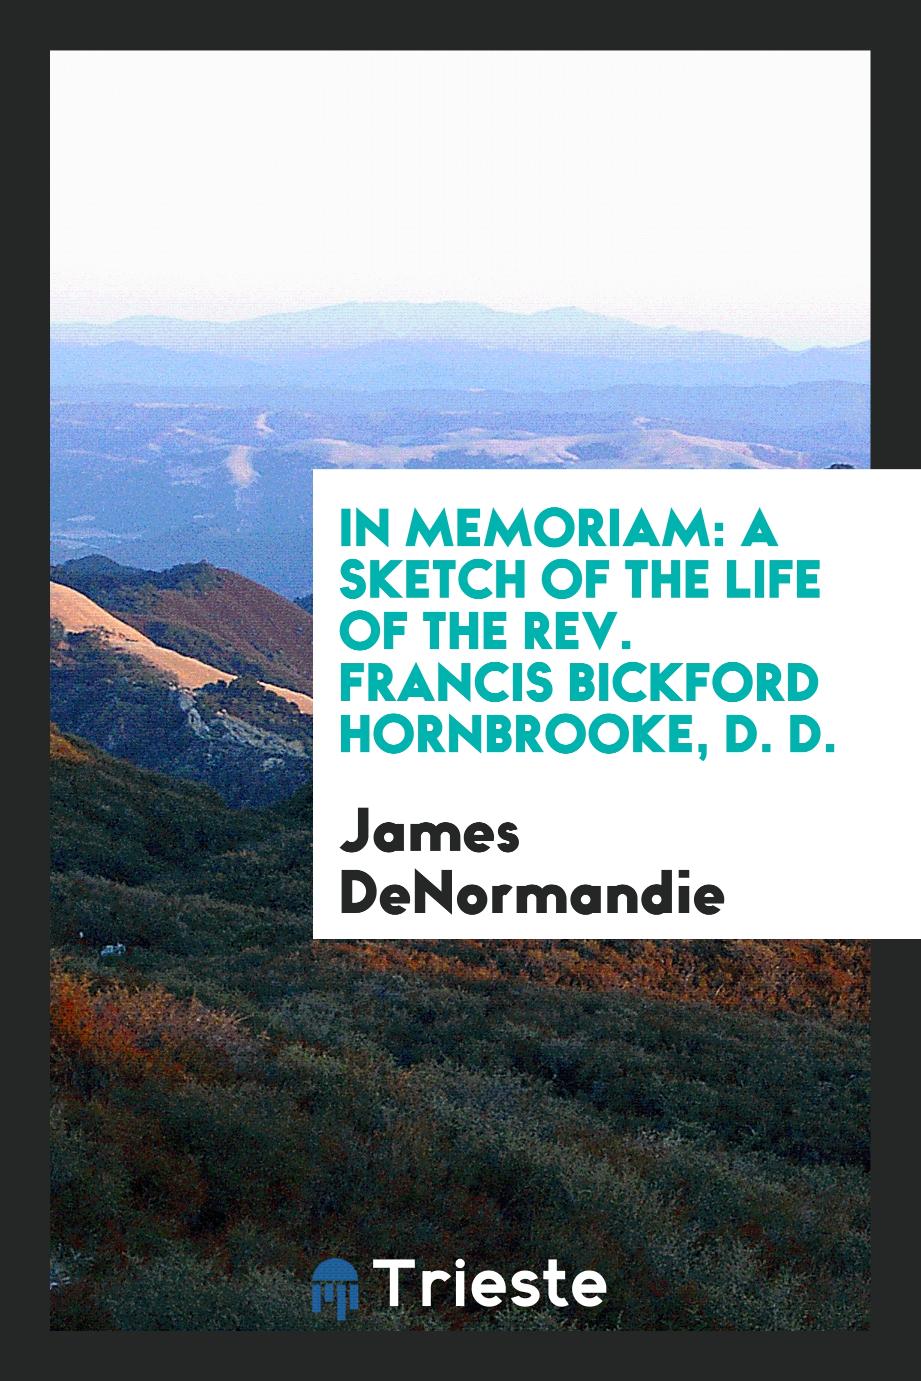 In Memoriam: A Sketch of the Life of the Rev. Francis Bickford Hornbrooke, D. D.